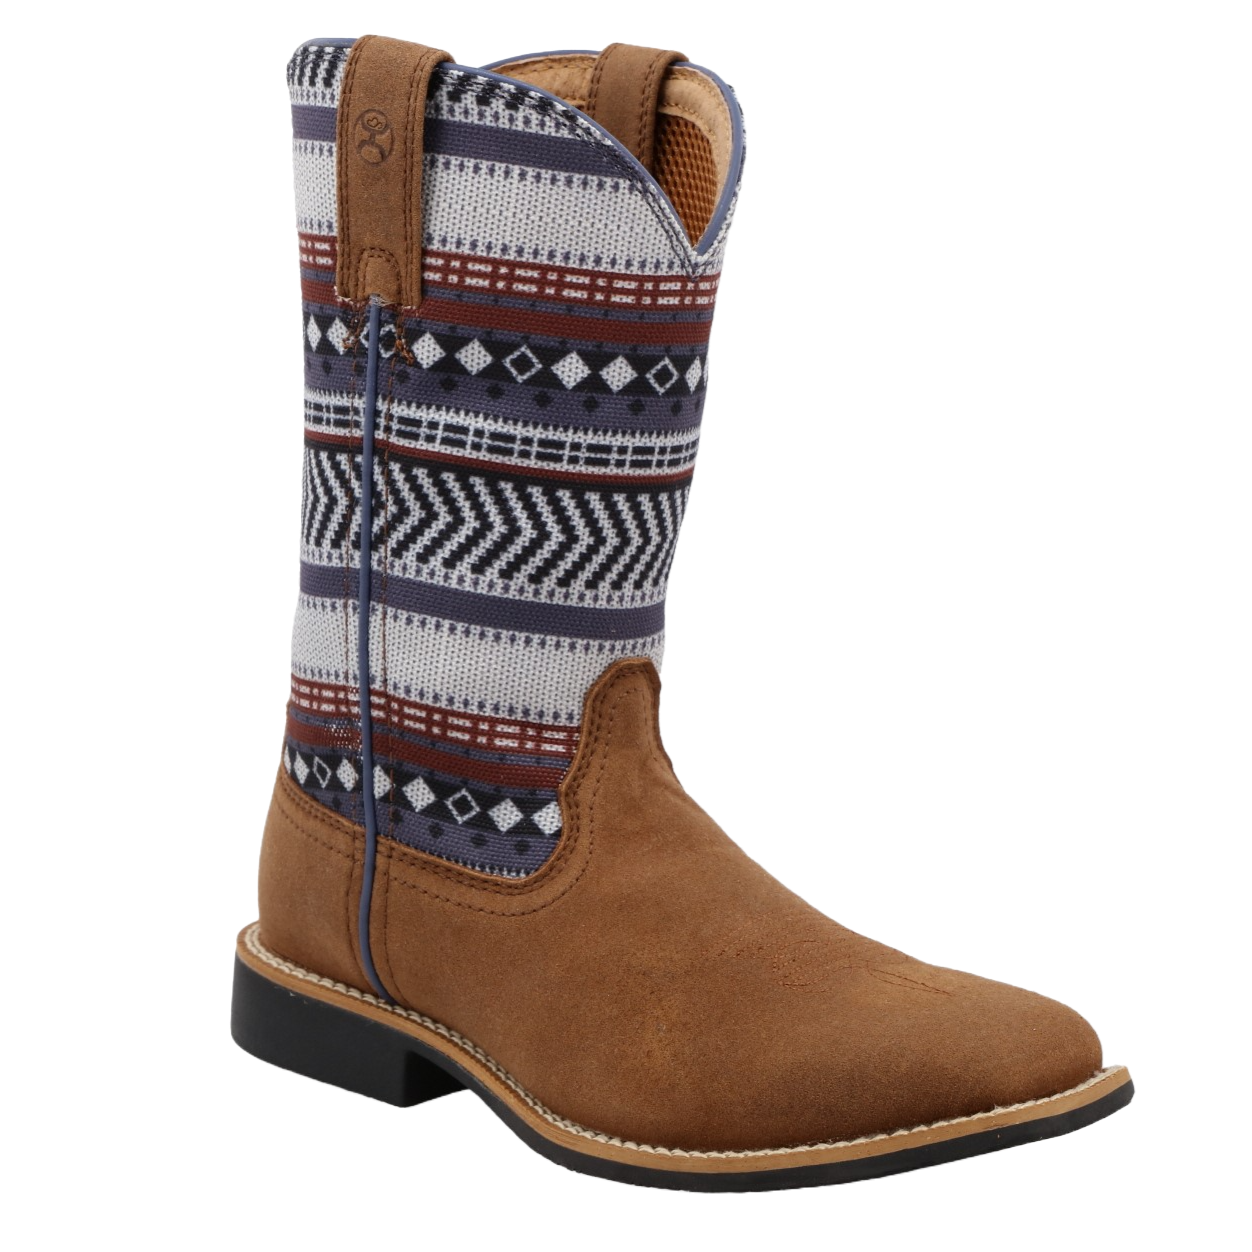 Twisted X Children's Hooey Aztec Print & Brown Square Toe Boots YHY0012